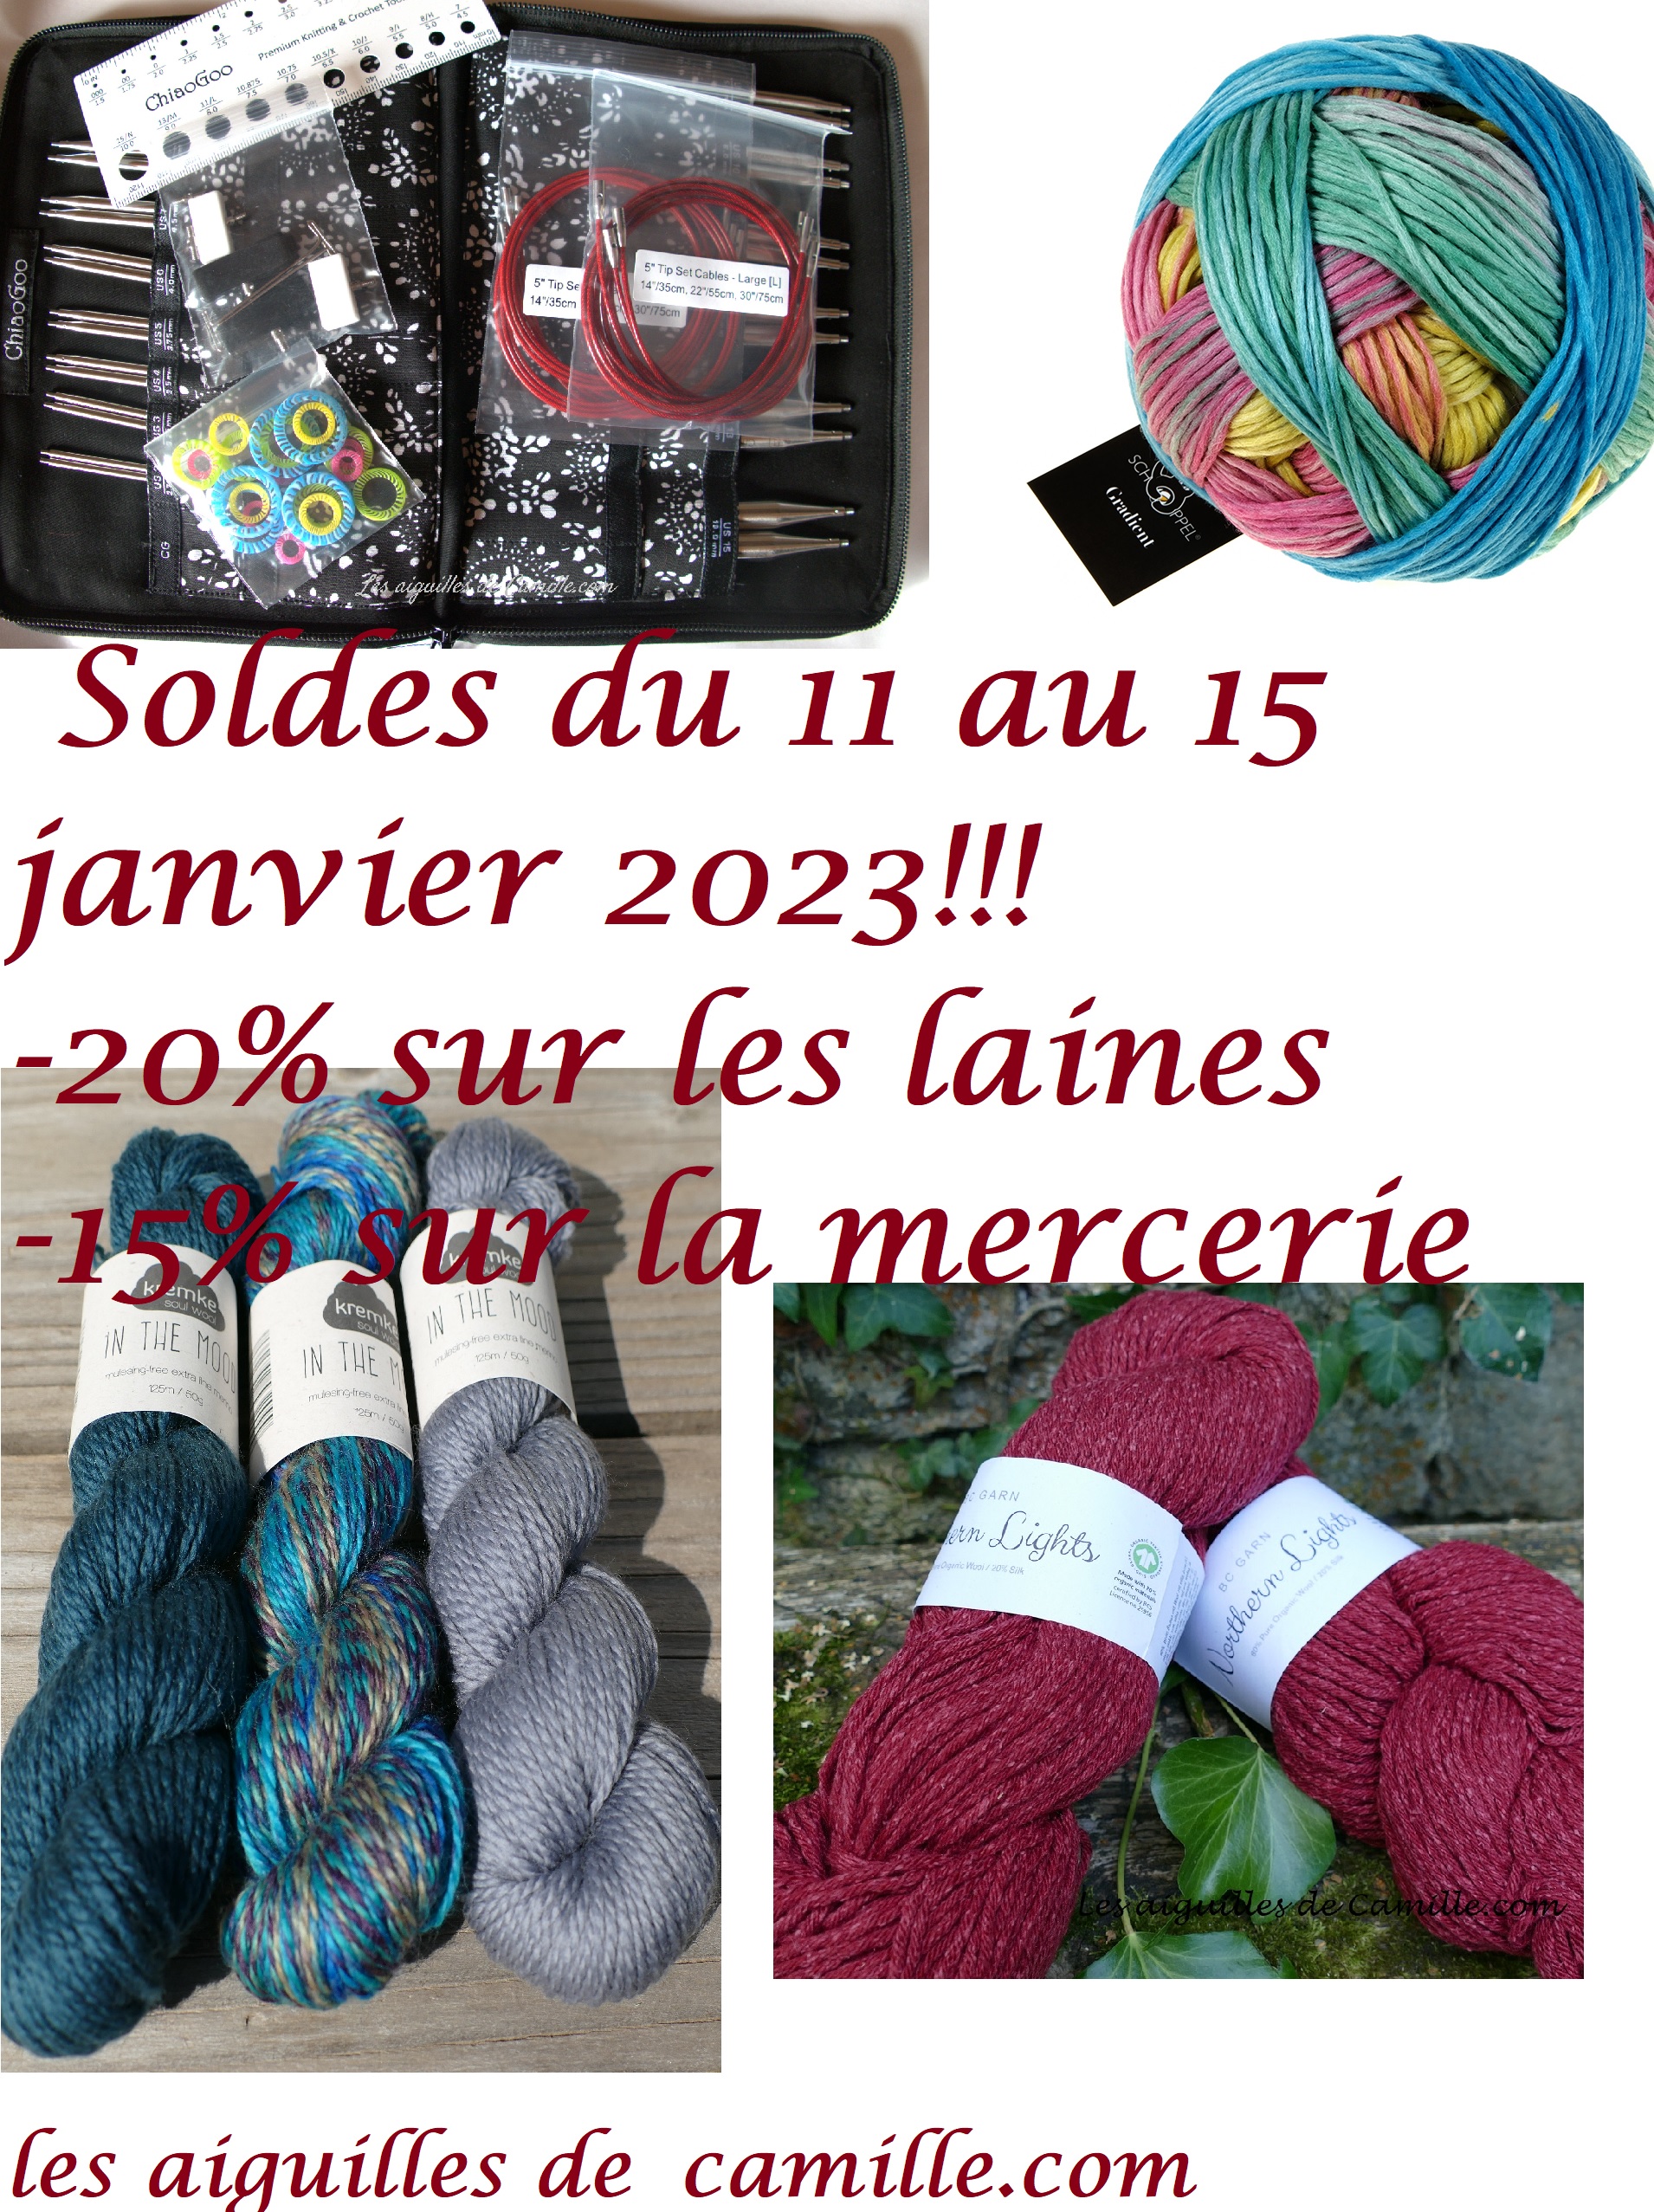 annonce_soldes_23.jpg